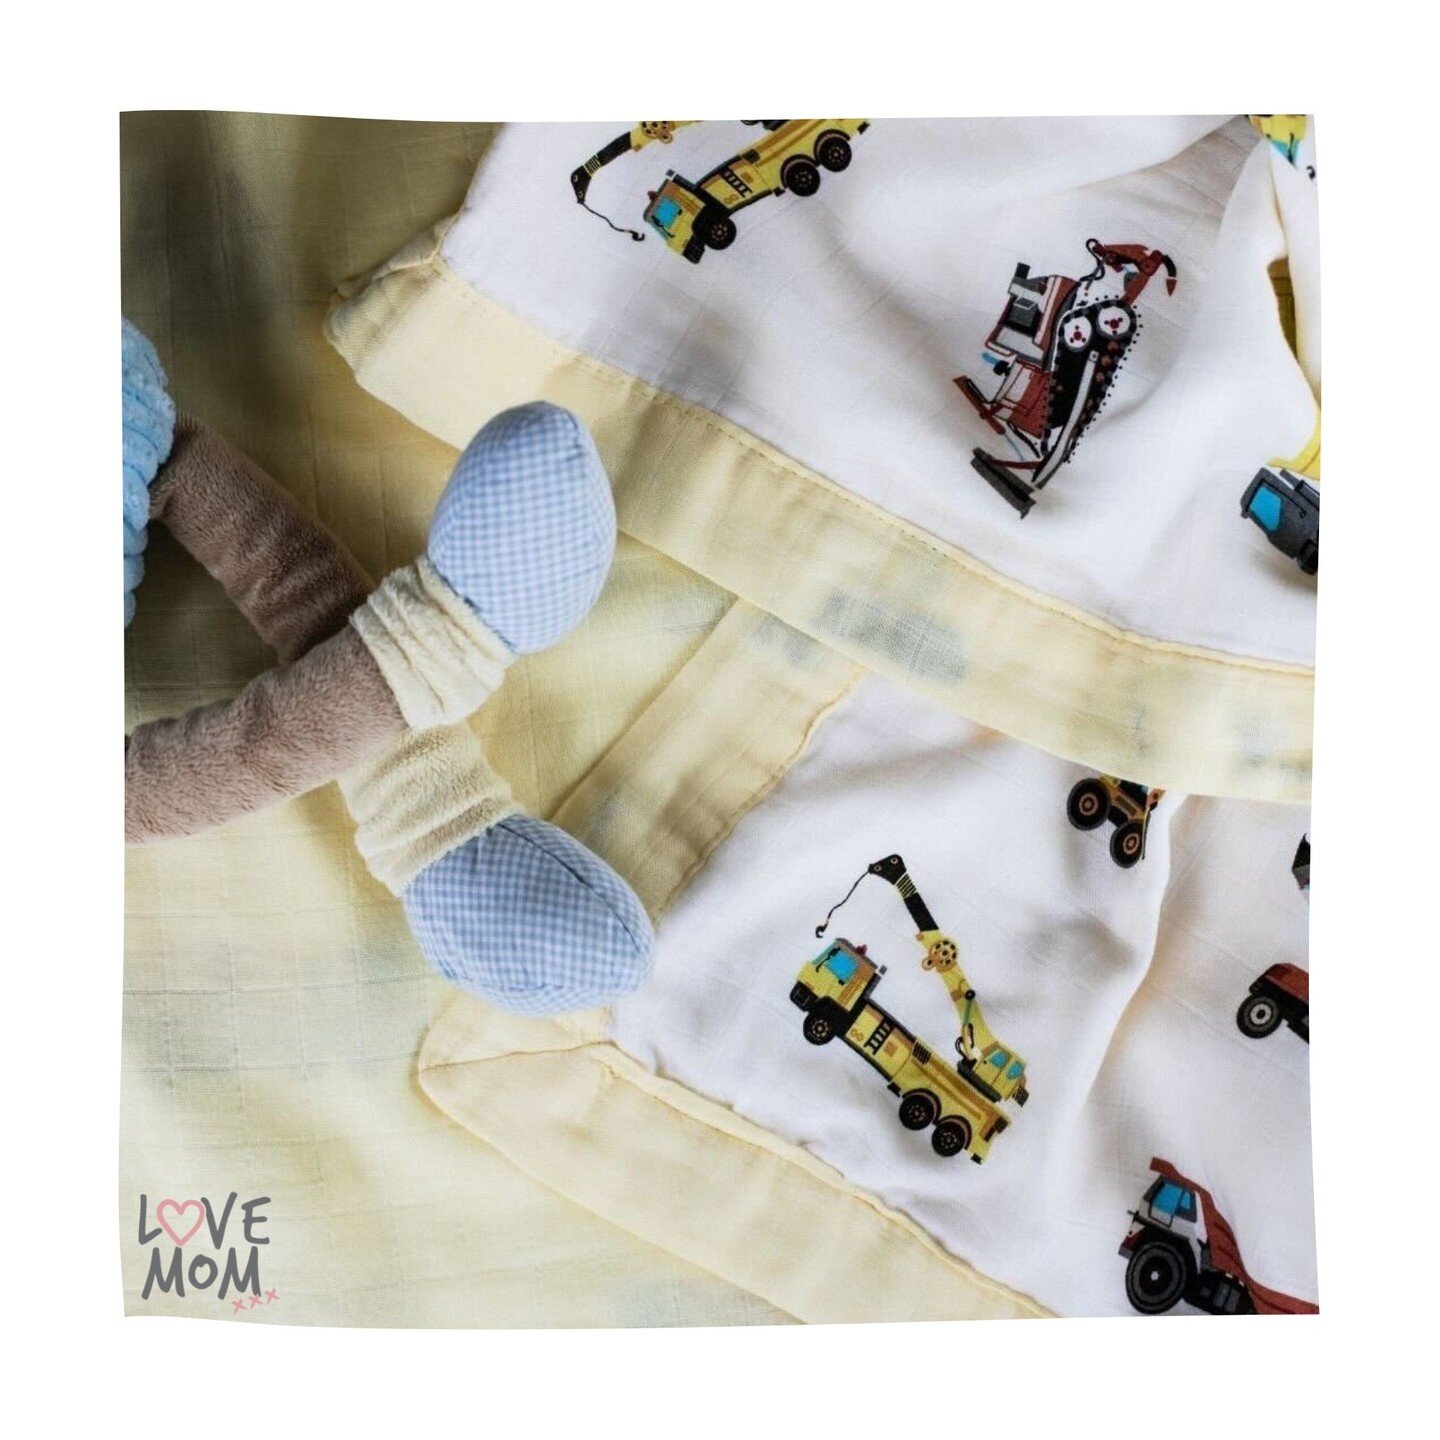 🚚Digger Truck 4 Layer Blanket🚛⁠
⁠
This silky soft blanket features four layers of eco-friendly, luxurious bamboo/cotton blend muslin. The lightweight, breathable nature makes it perfect for cooler summer nights or chilly winter days. ⁠
⁠
- Love Mom